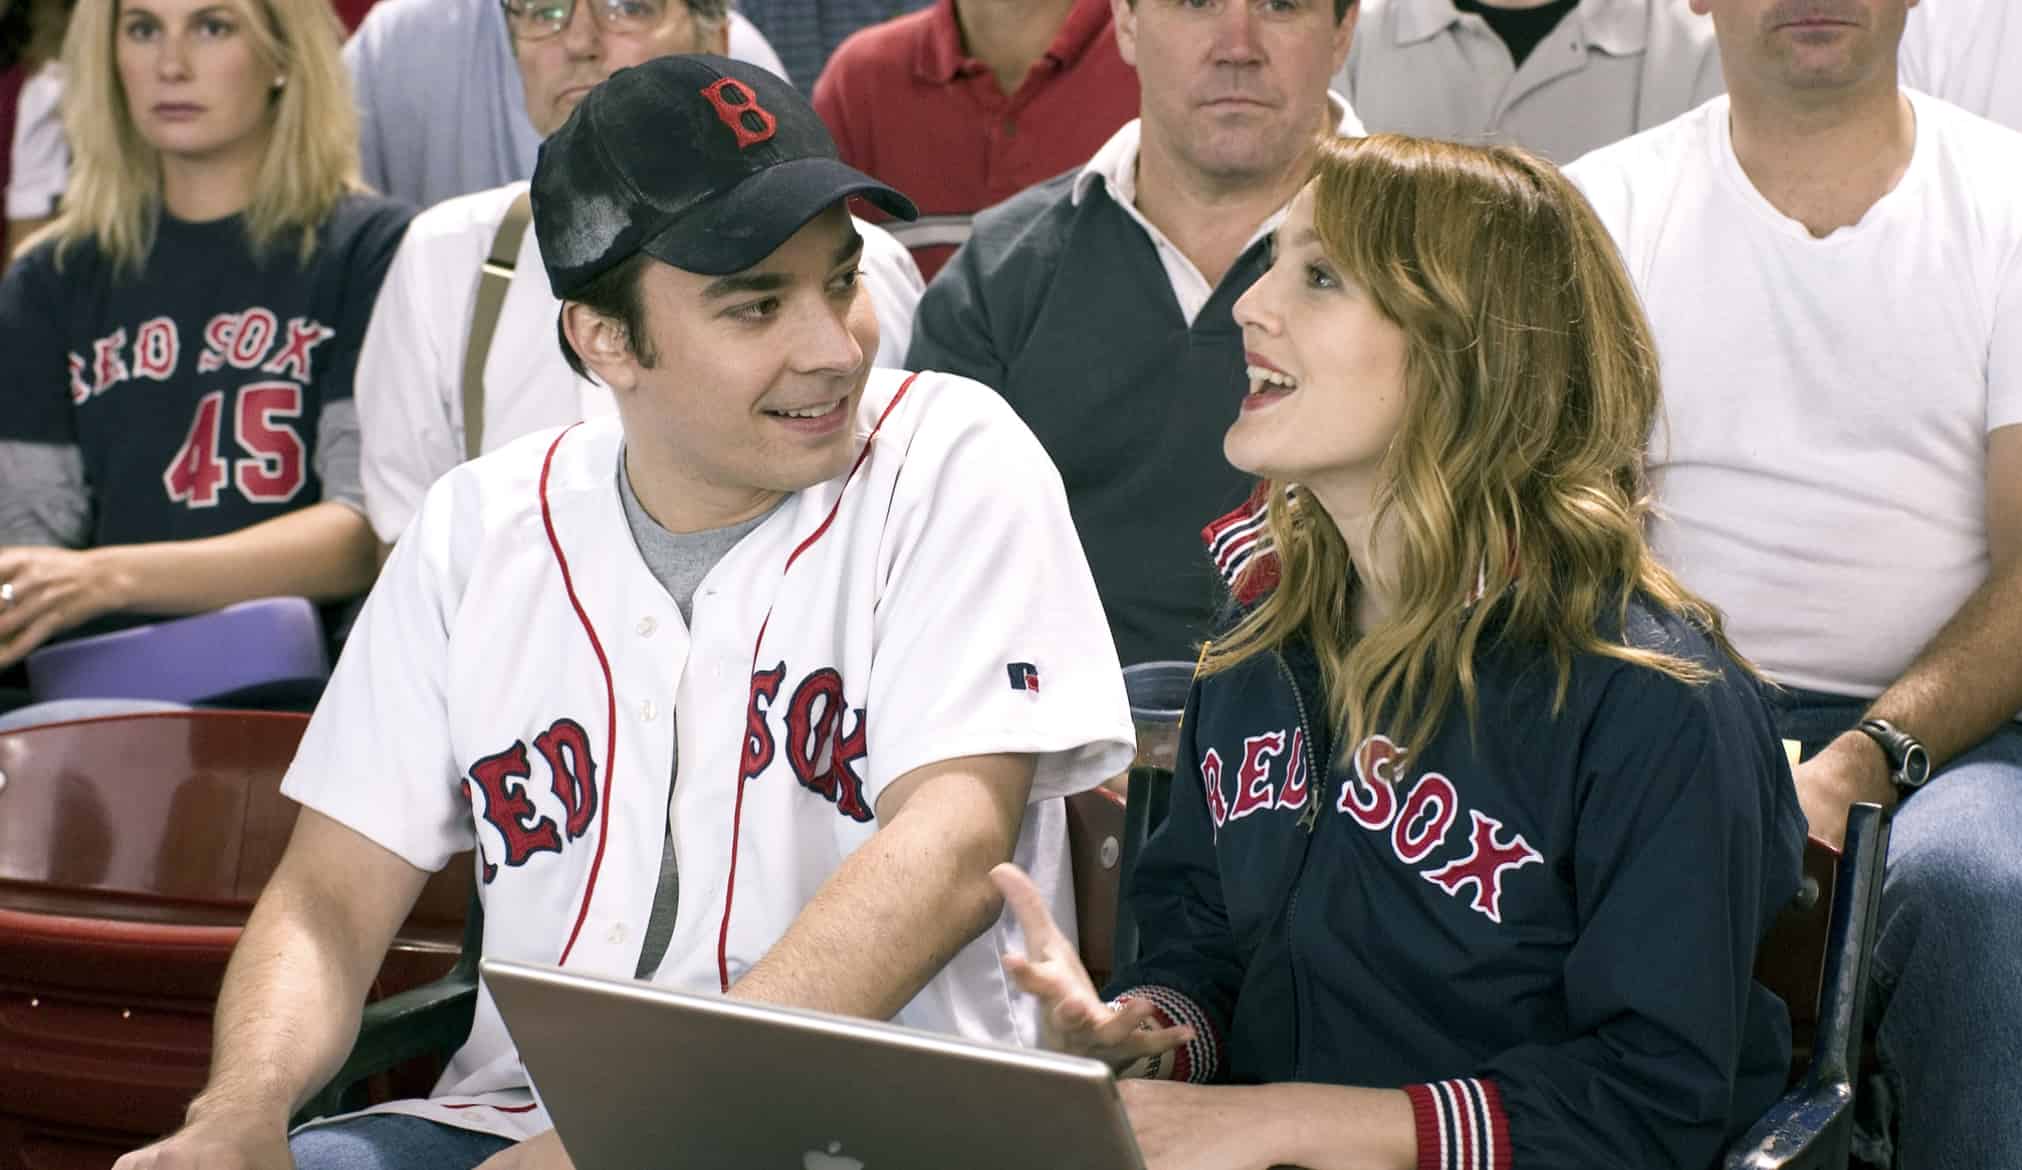 A man wearing a Red Sox jersey and cap sitting next to a woman wearing a Red Sox jacket in this image from Amazon Prime Video